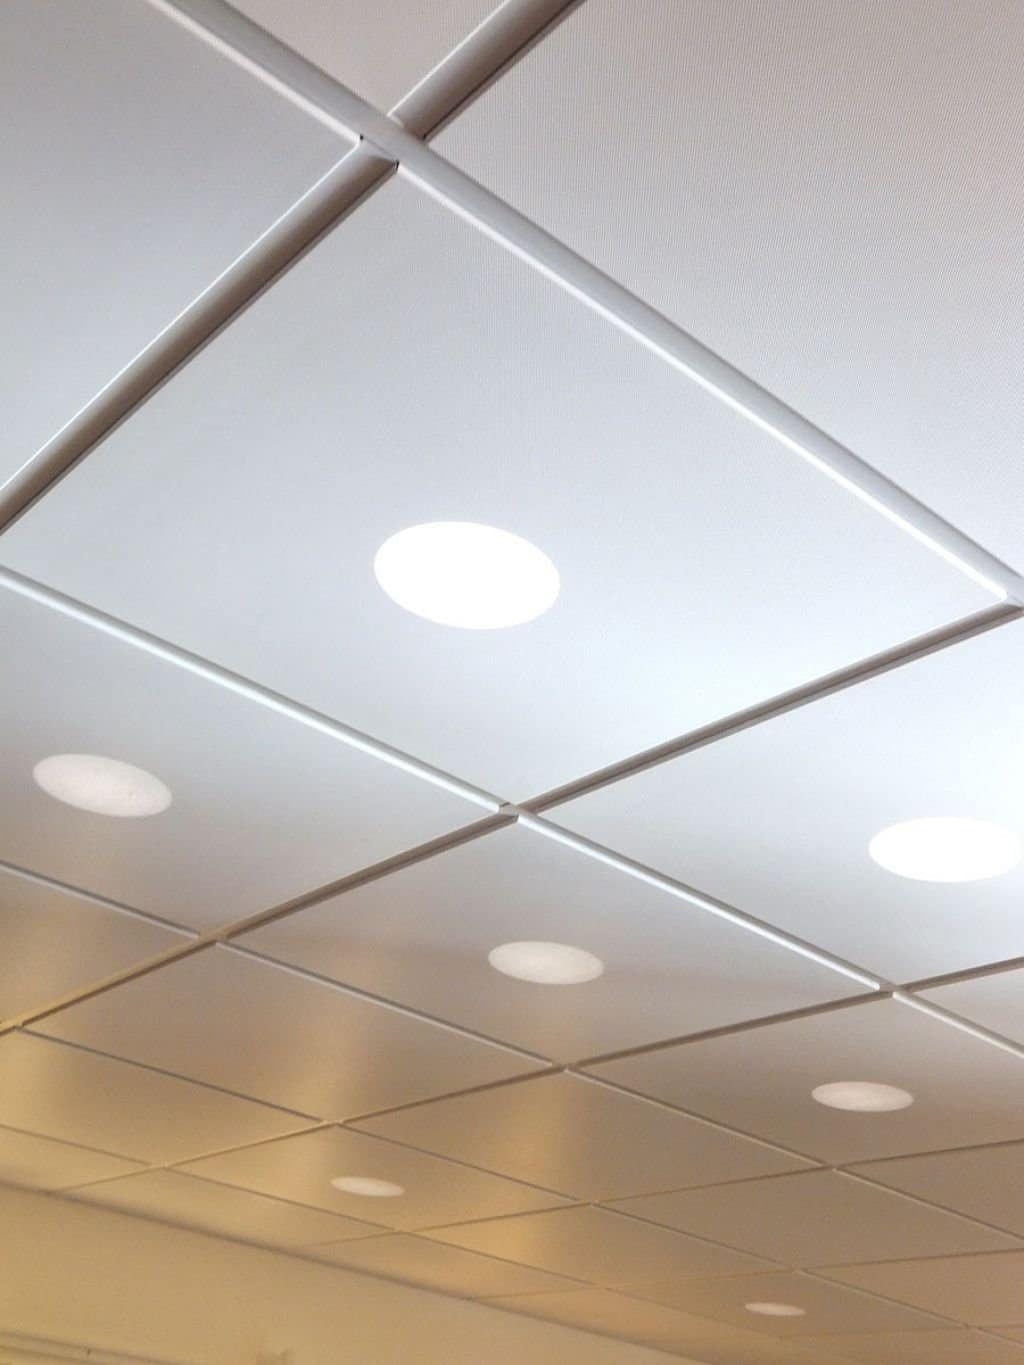 Permalink to Ceiling Tiles Can Lights